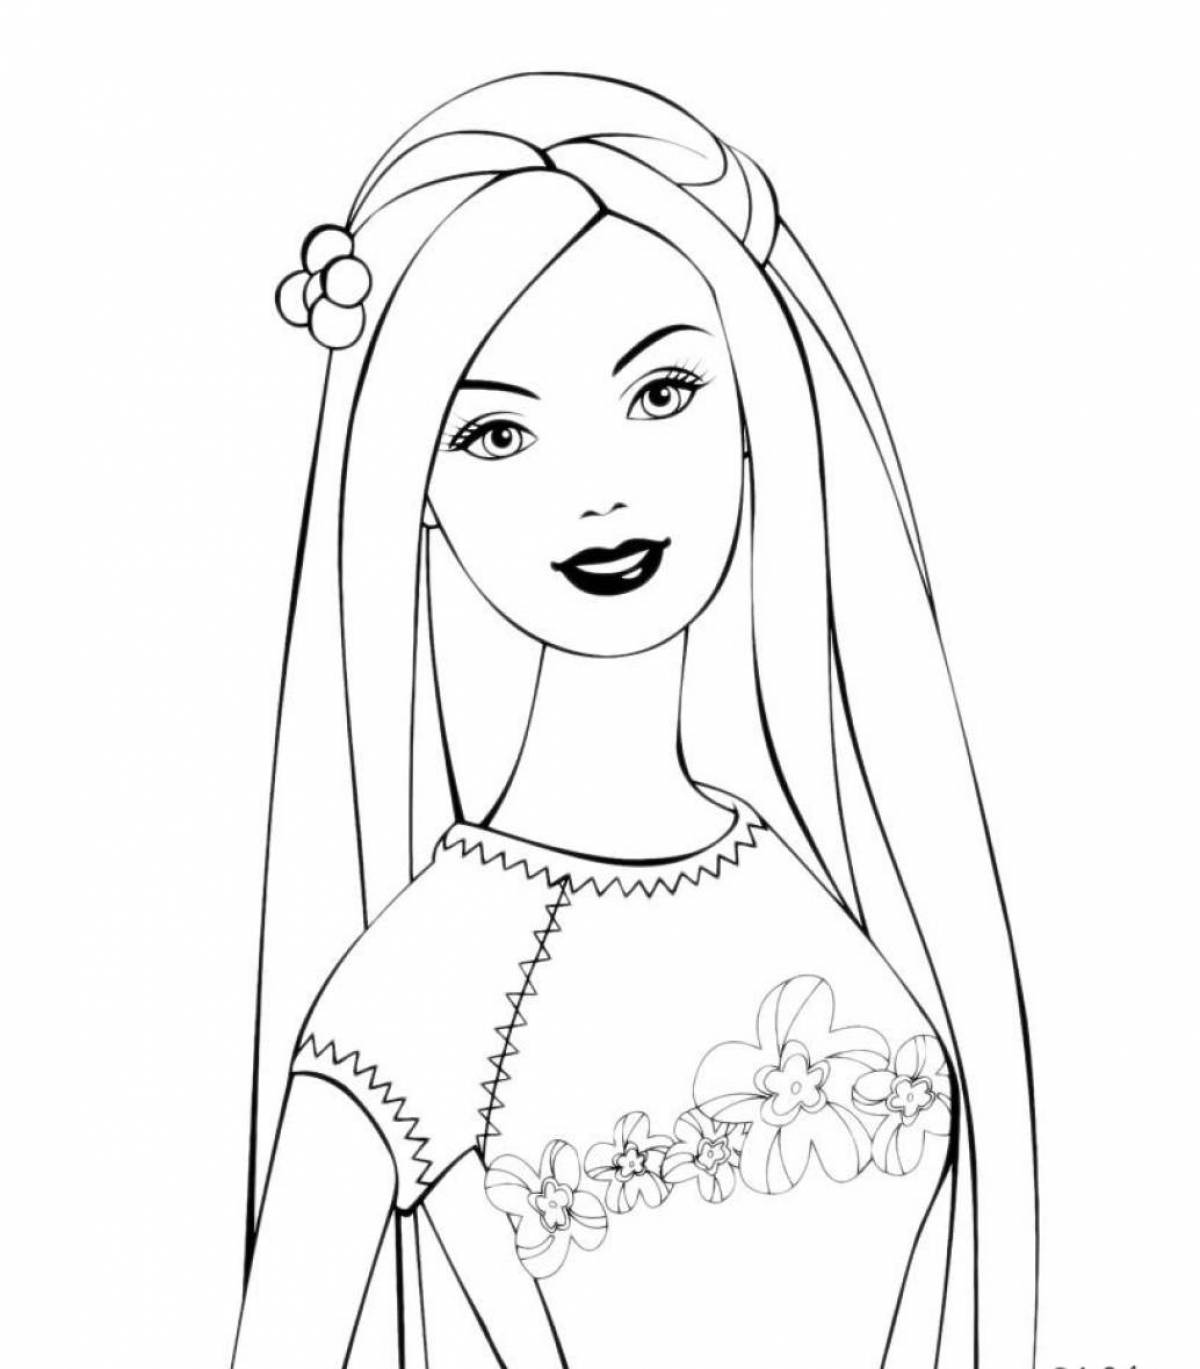 Adorable barbie coloring book for kids